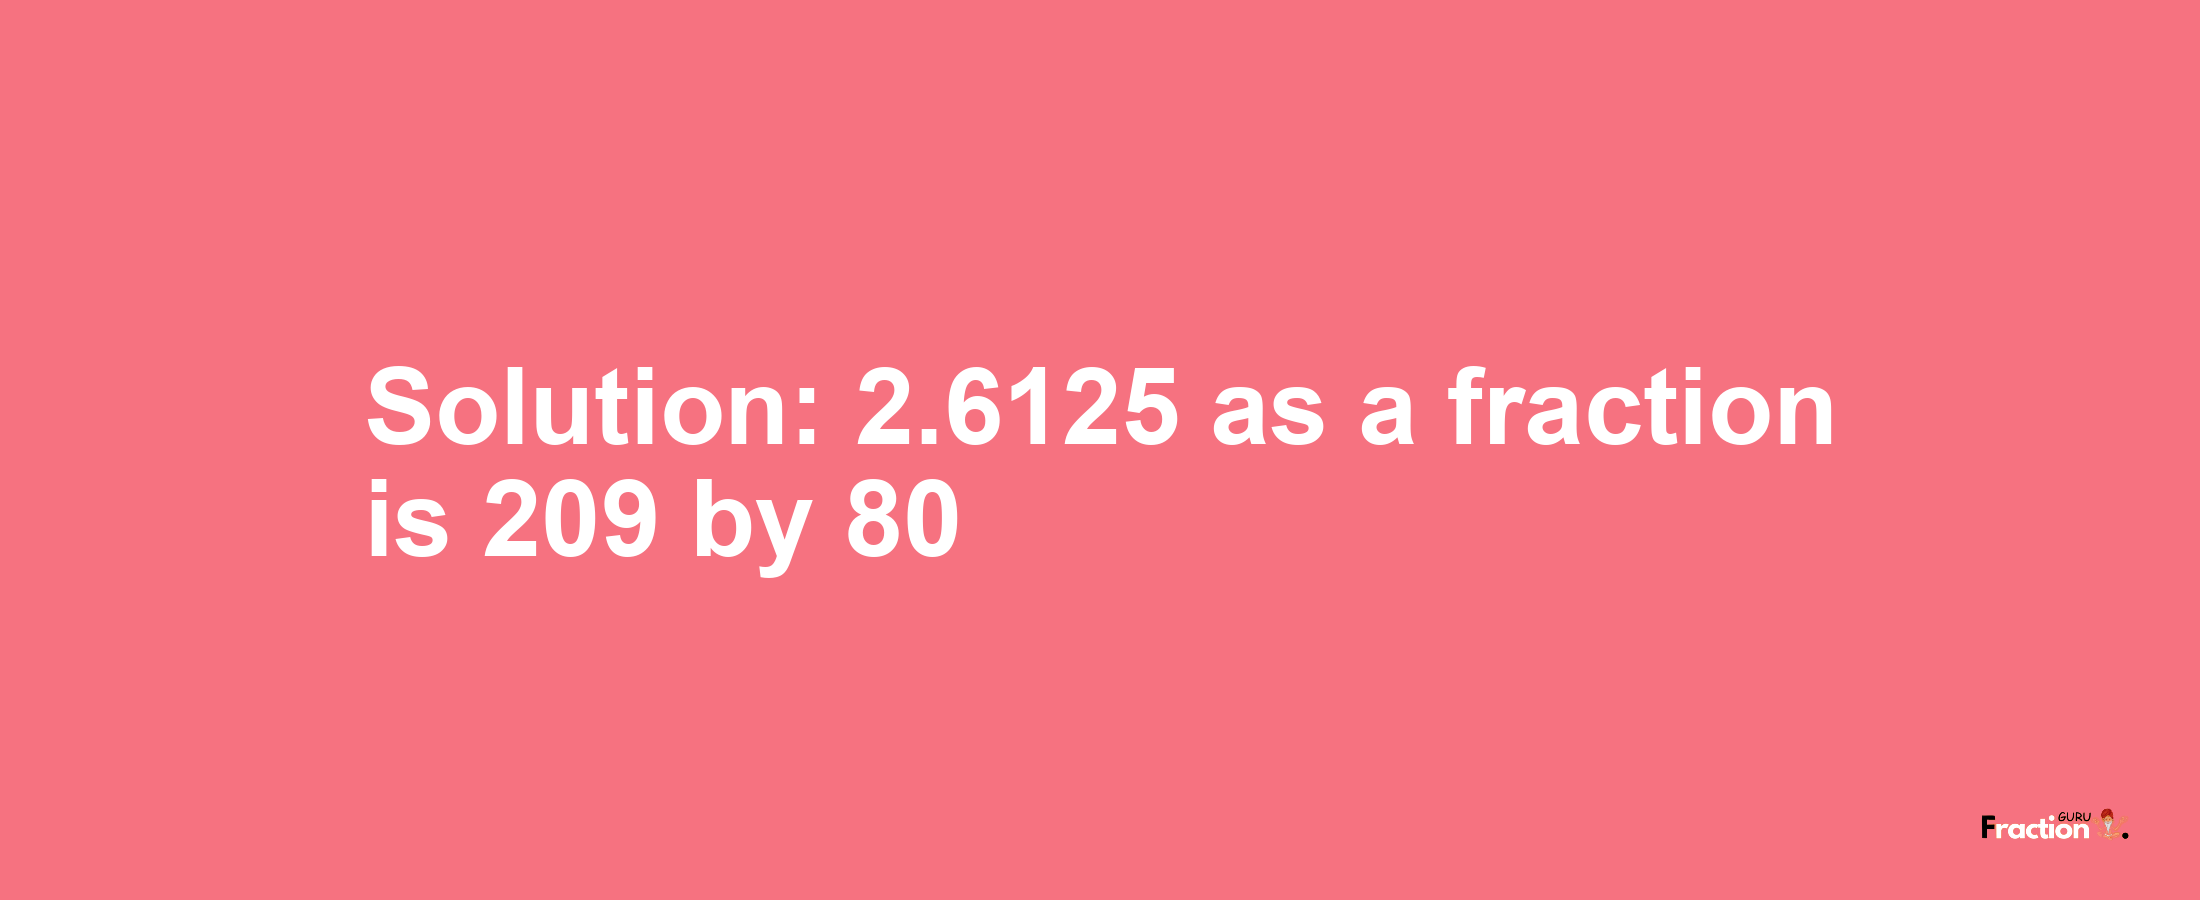 Solution:2.6125 as a fraction is 209/80